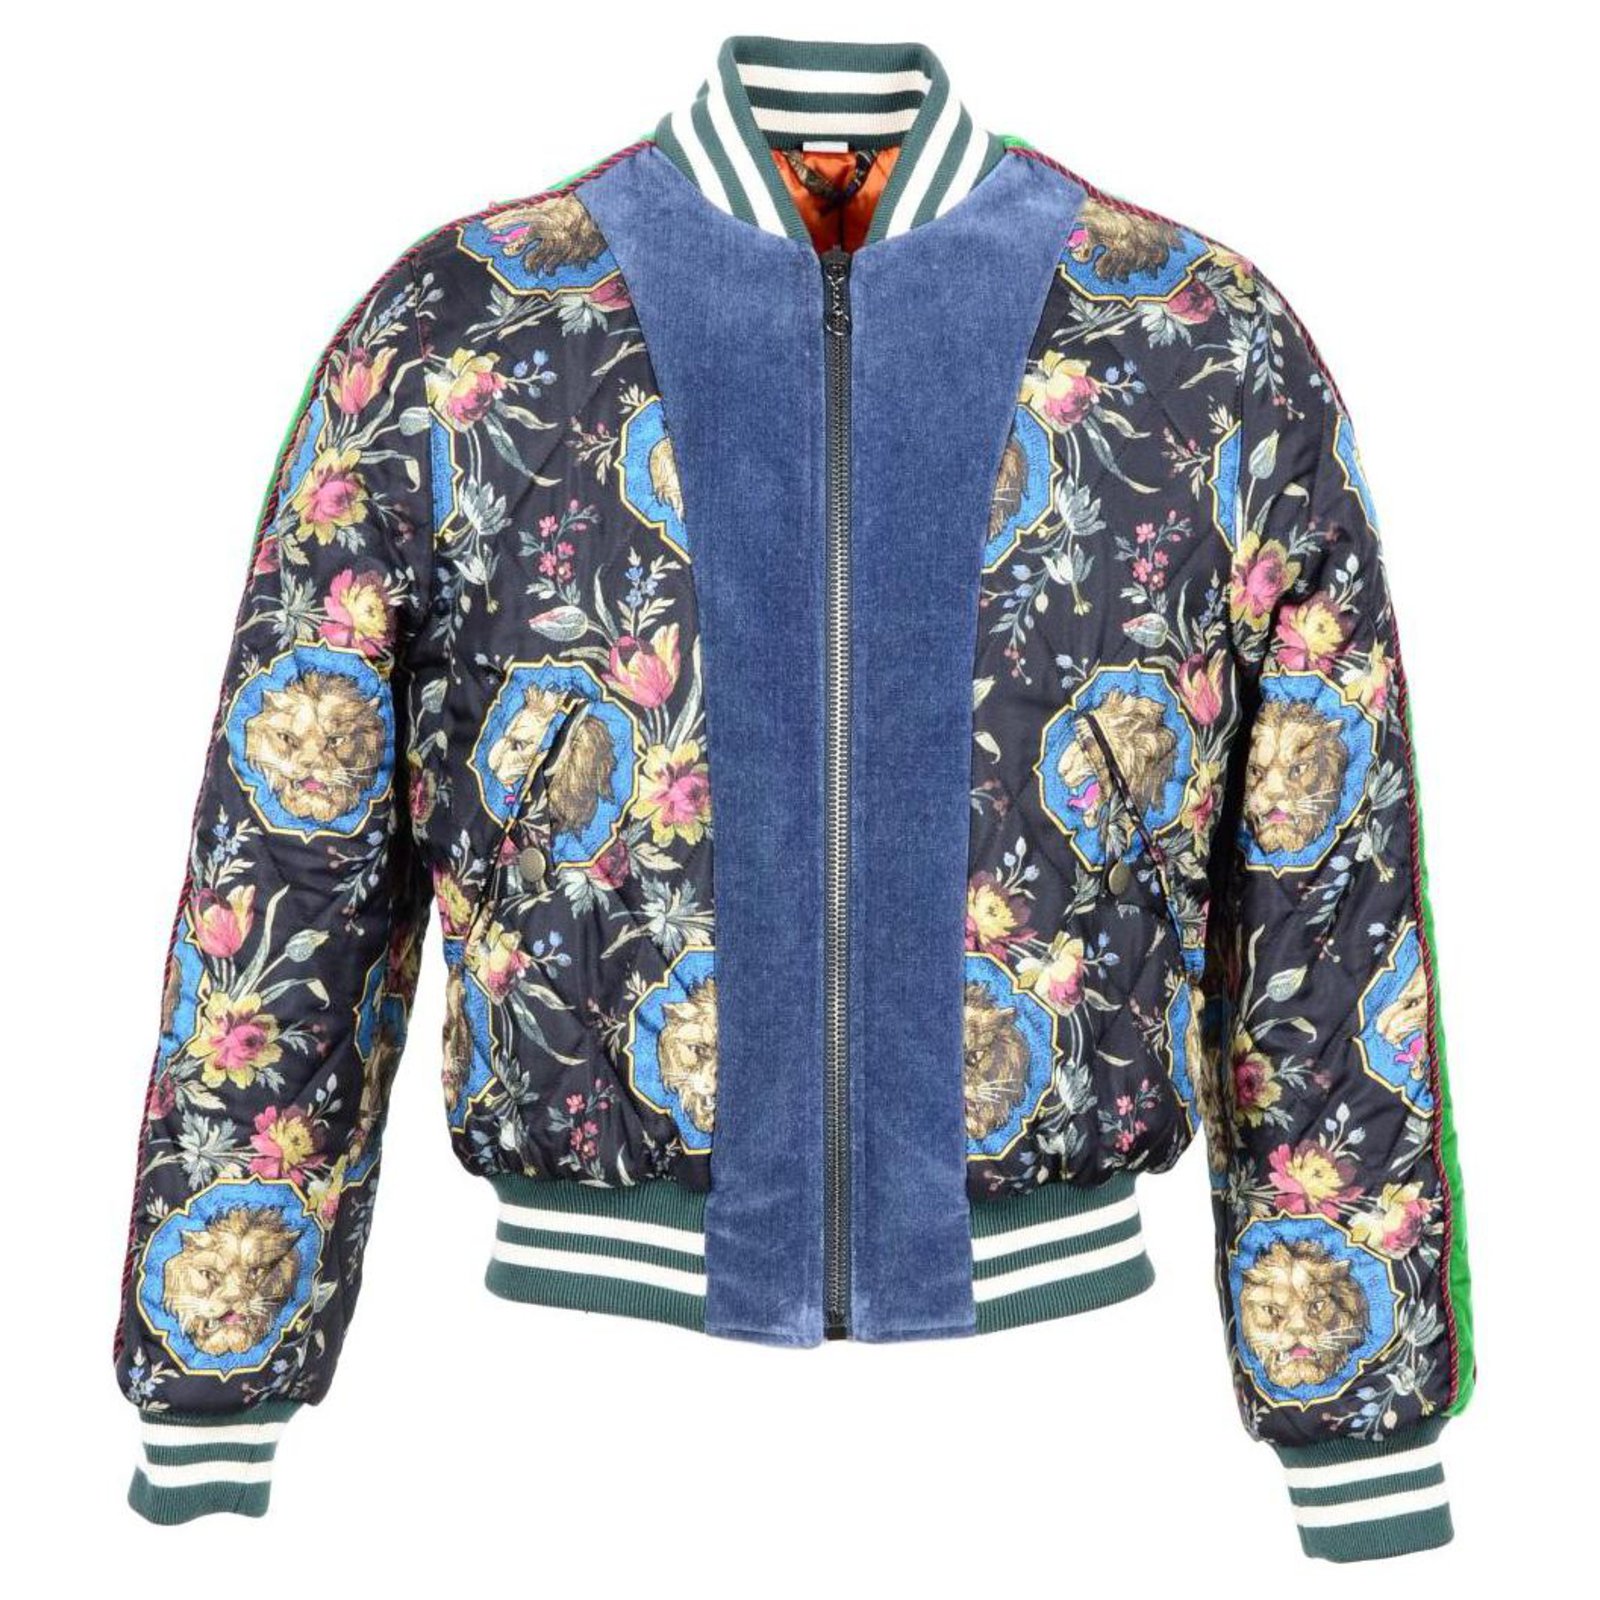 gucci colorful jacket